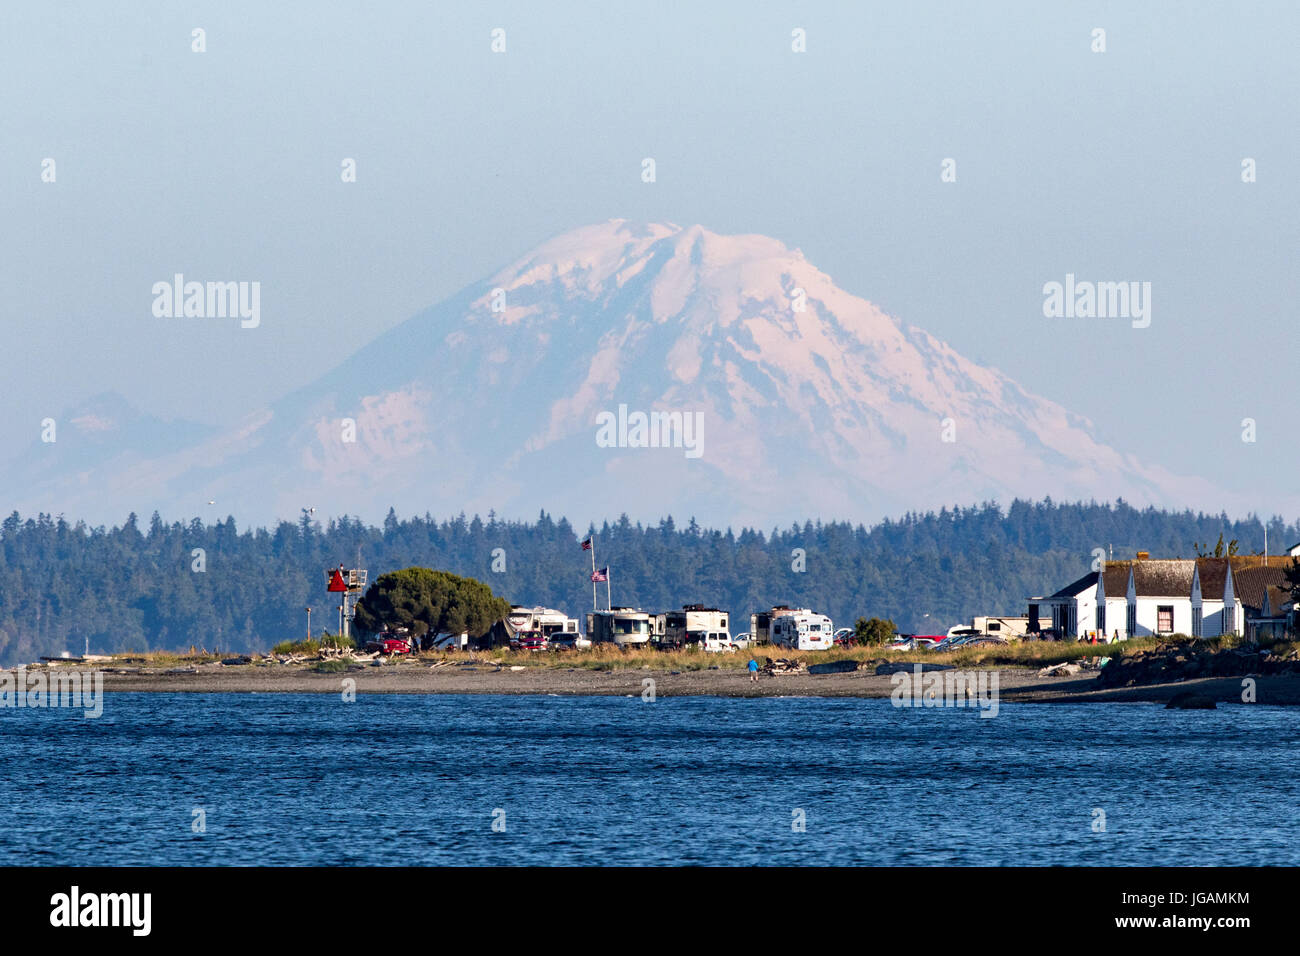 Mount Rainier, Mt Rainier, Mt. Rainier with Point Hudson, Port Townsend in foreground. Campers camping Point Hudson on Puget Sound. Stock Photo